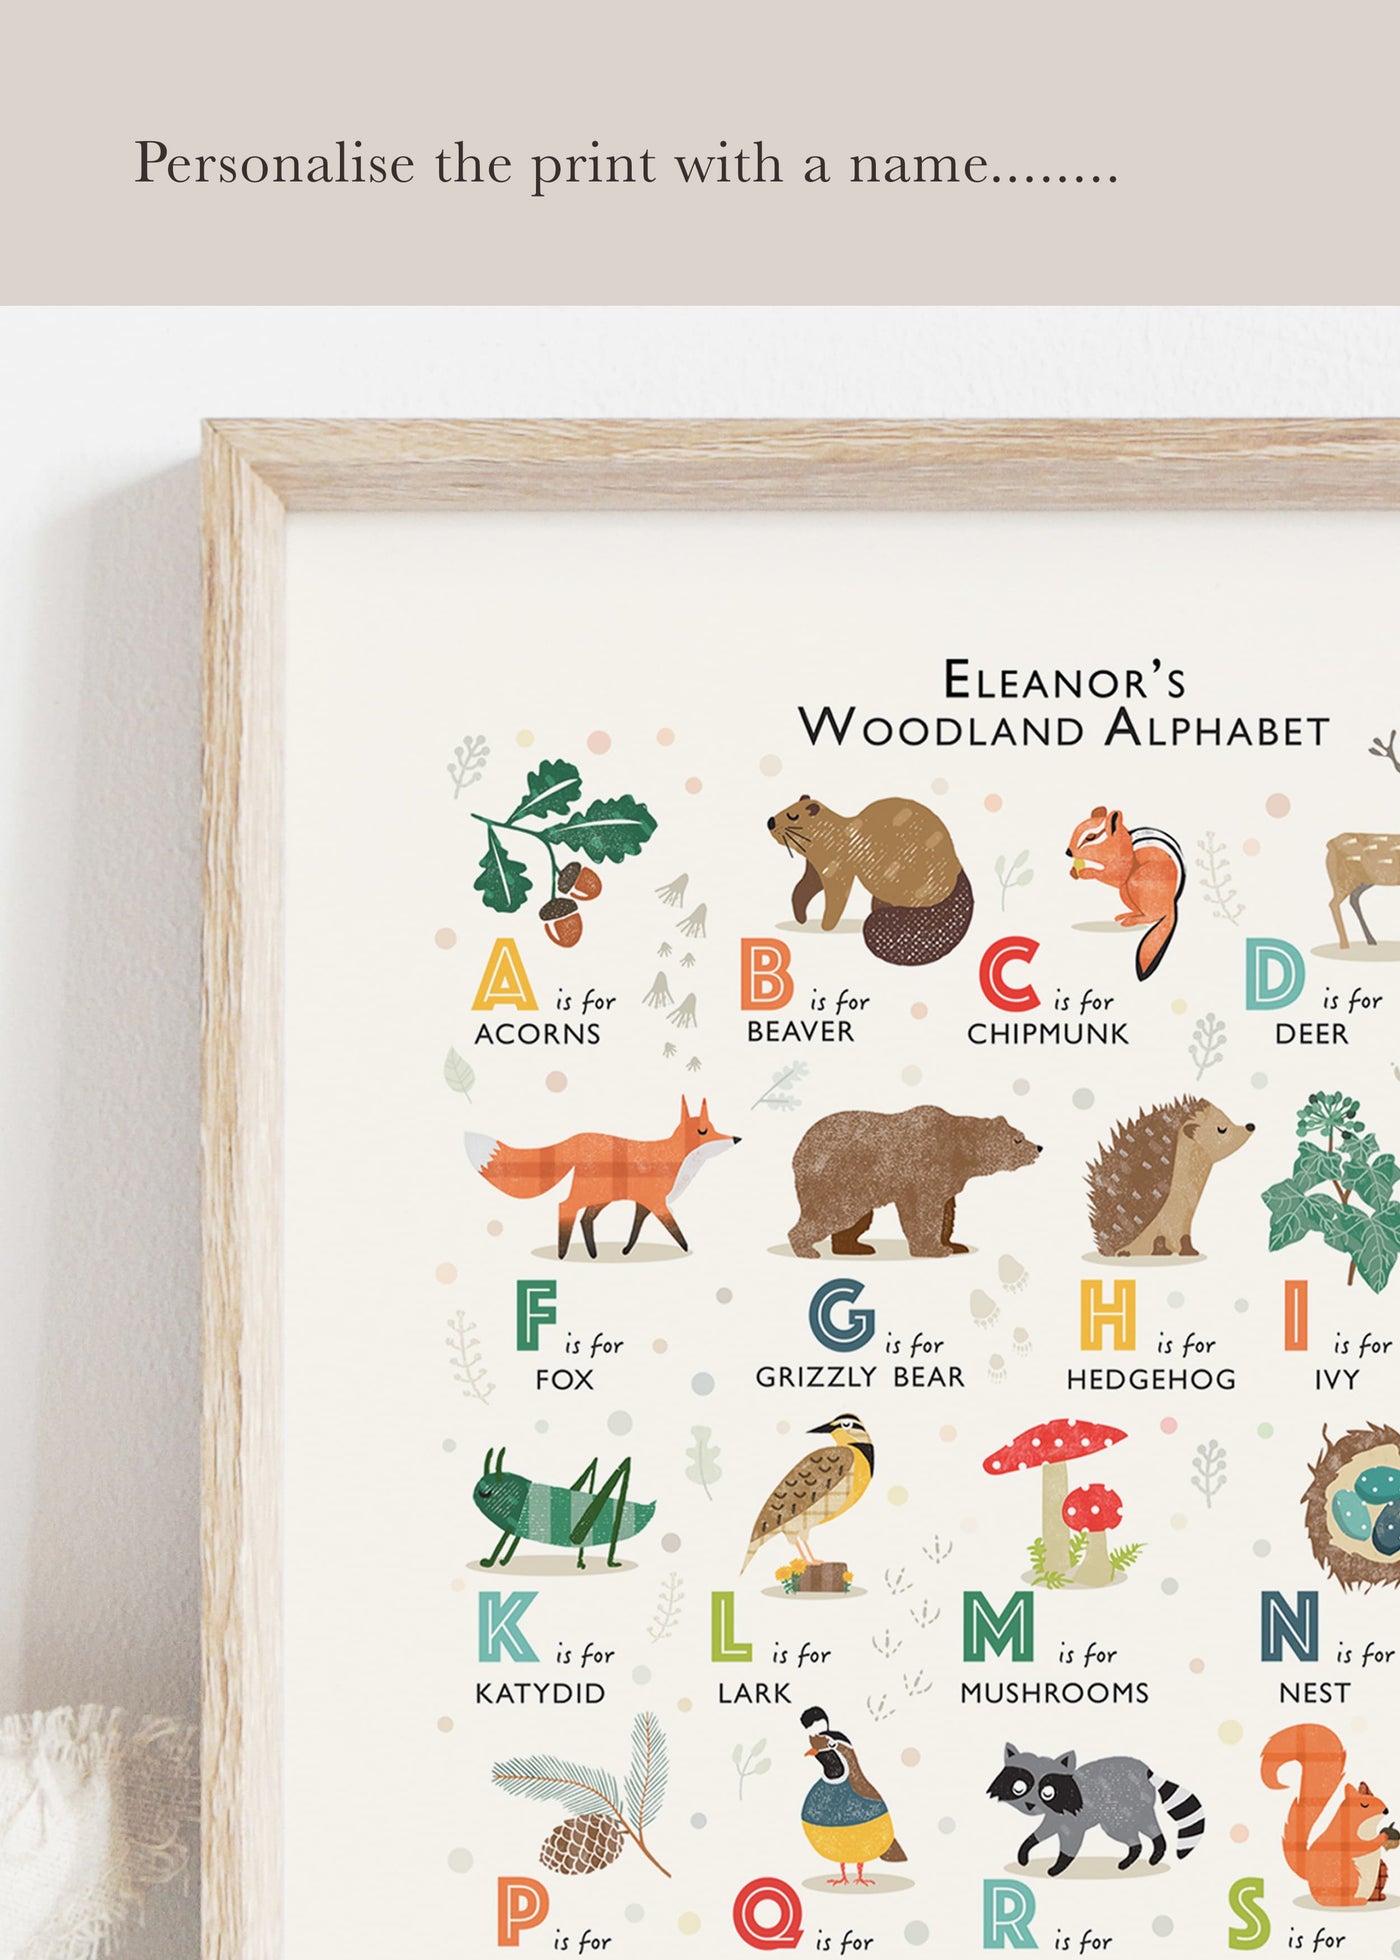 A personalised woodland alphabet poster personalised with a name to read Eleanor's Woodland Alphabet 